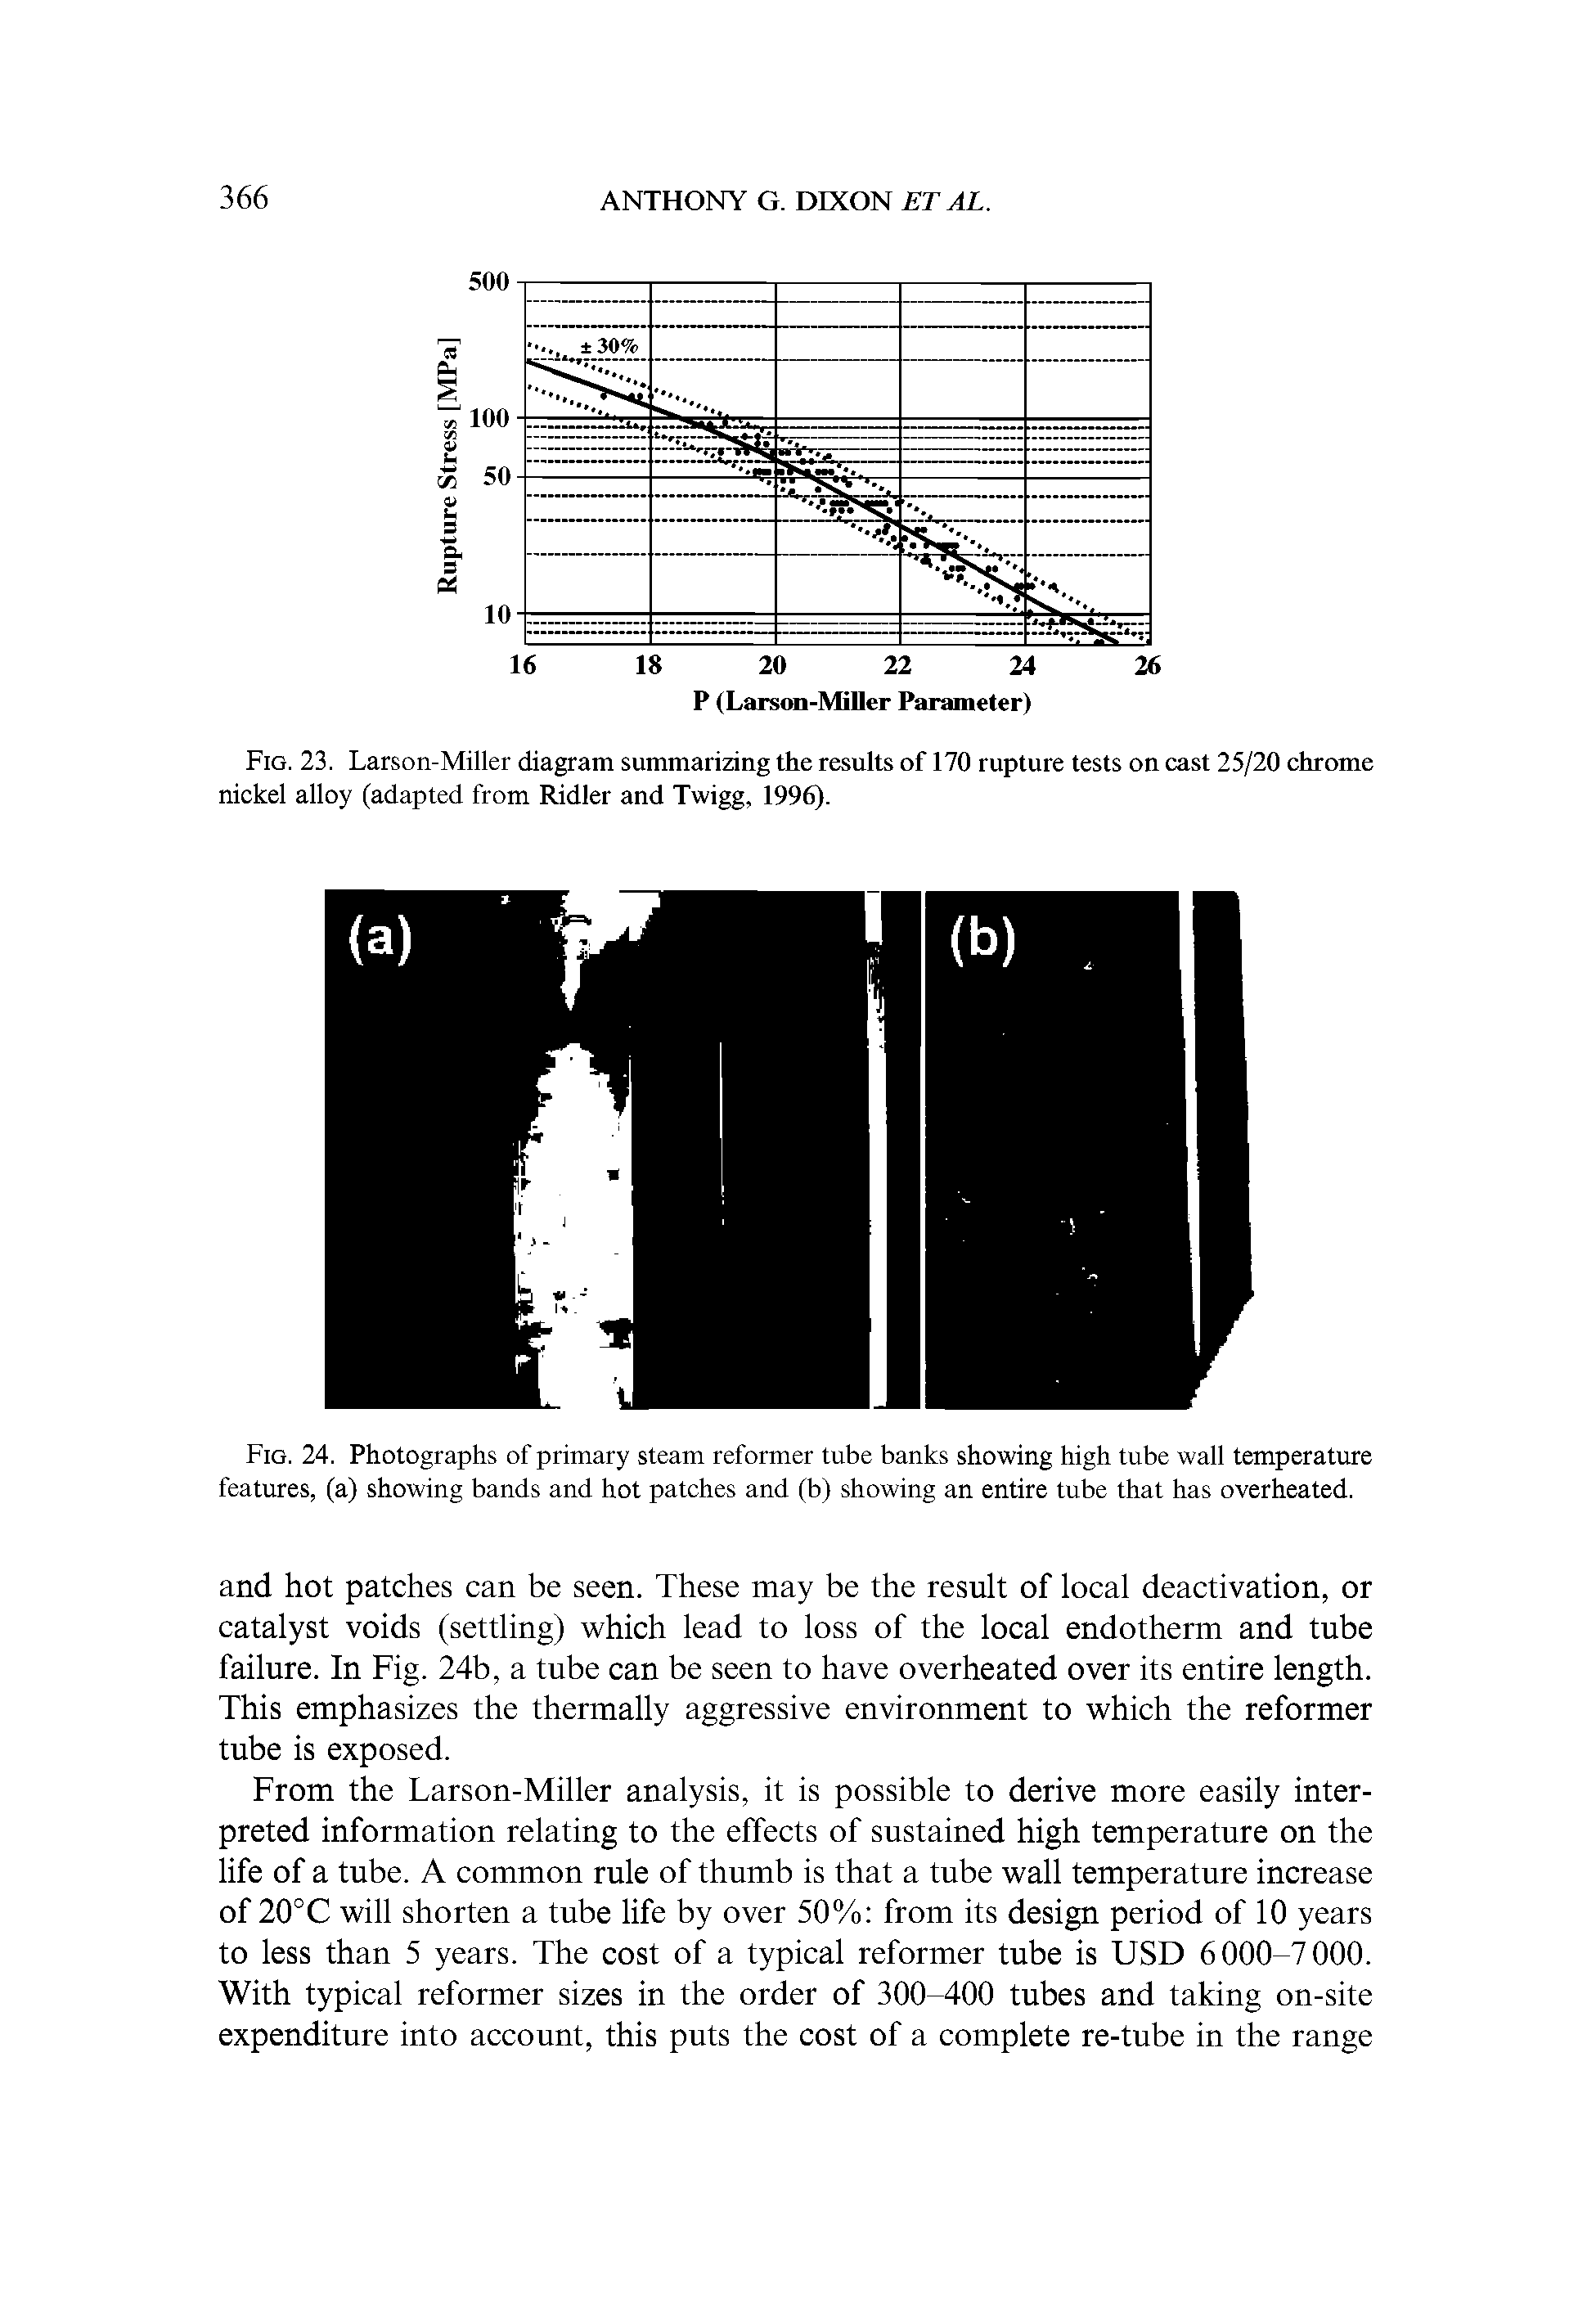 Fig. 24. Photographs of primary steam reformer tube banks showing high tube wall temperature features, (a) showing bands and hot patches and (b) showing an entire tube that has overheated.